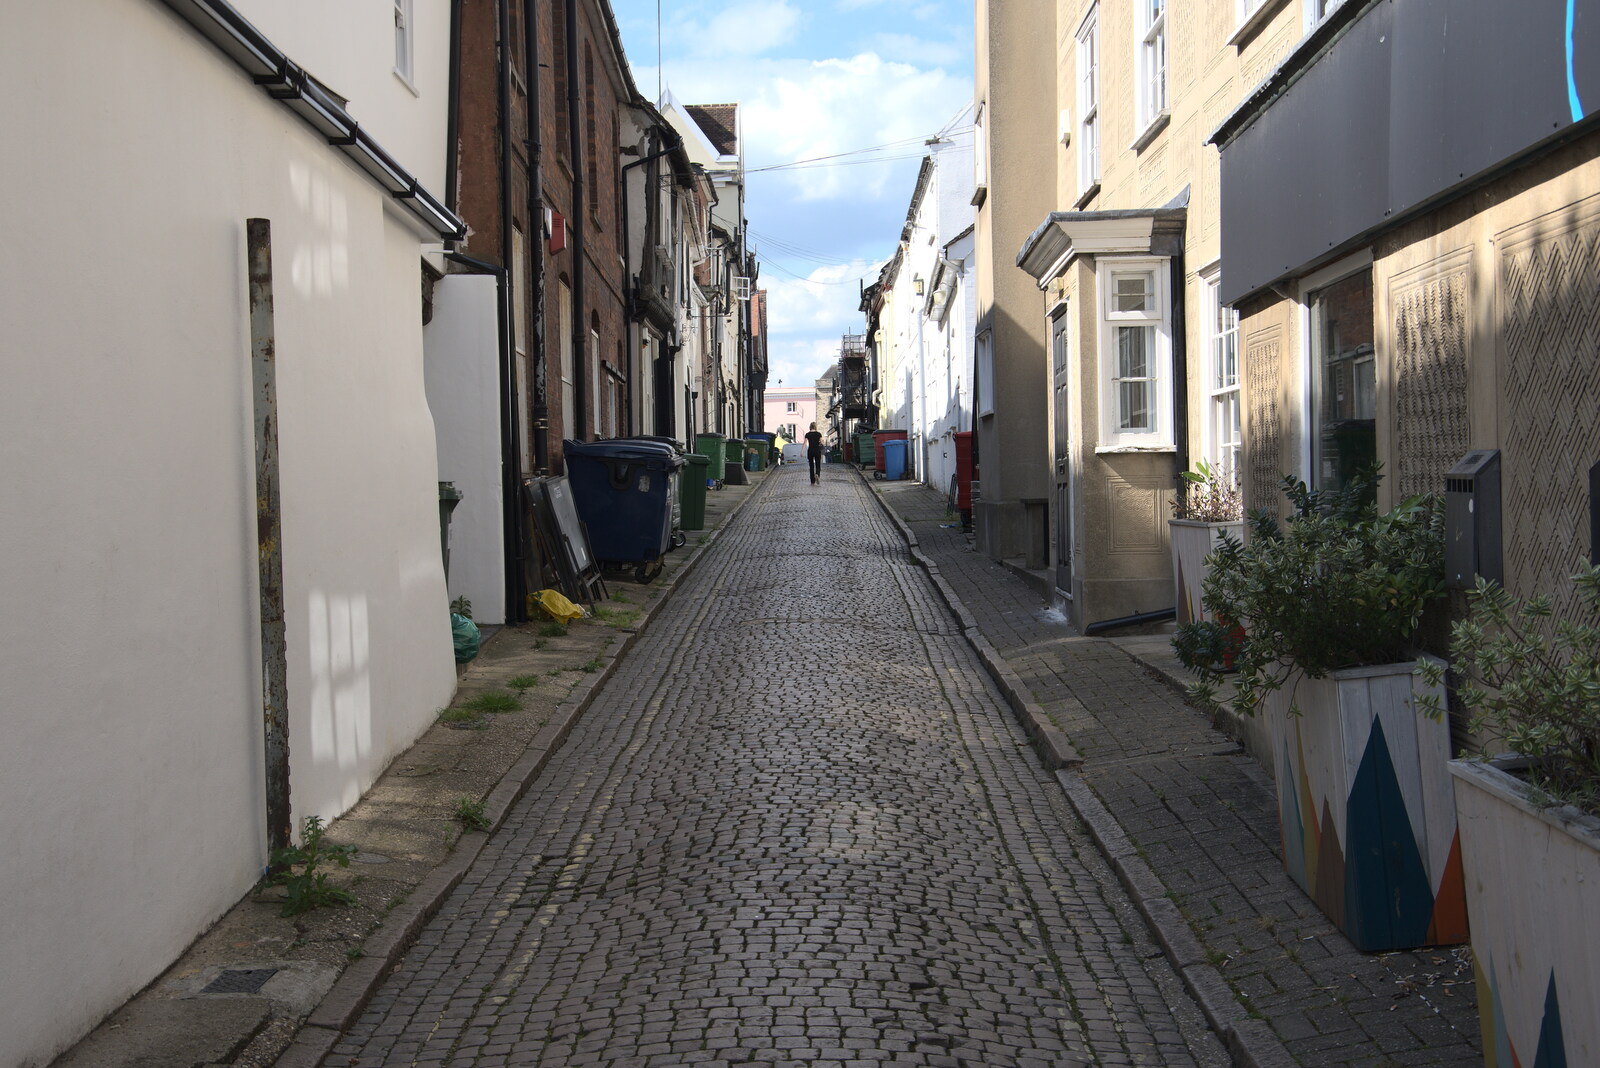 Cobbled back street from A Weekend at the Angel Hotel, Bury St. Edmunds, Suffolk - 5th June 2021